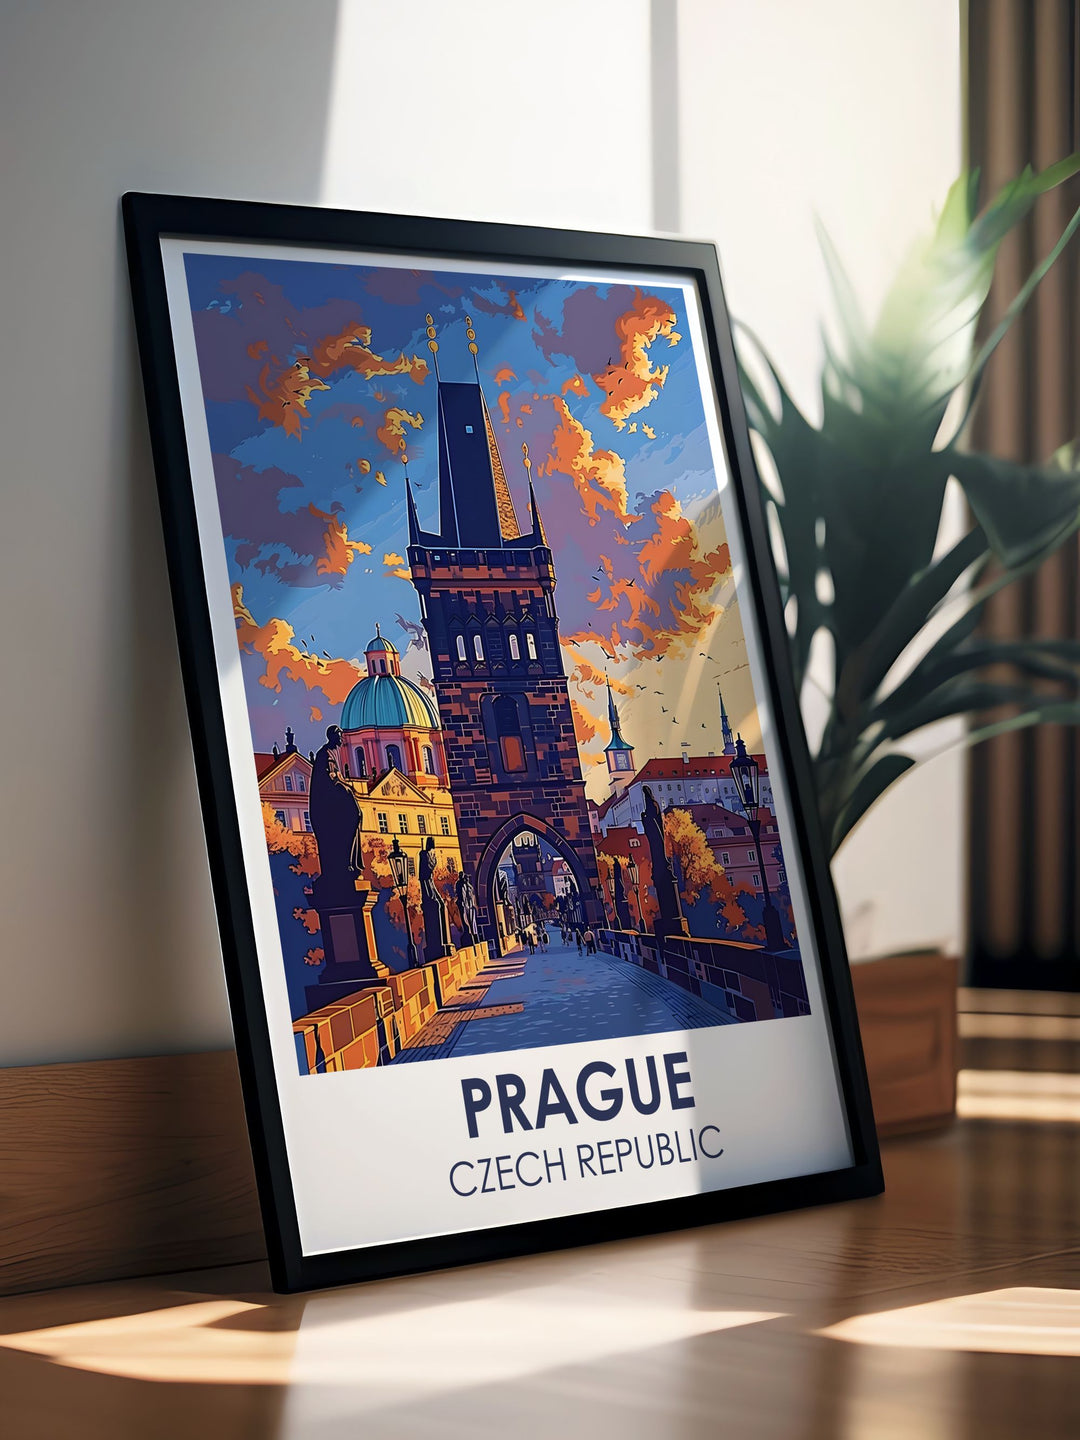 Discover the charm of Prague with a Charles Bridge Karluv vintage print. This Prague Poster is perfect for those who appreciate Travel Prints and want to bring a piece of the Czech Republic into their home decor. Ideal for Prague Home Decor enthusiasts.